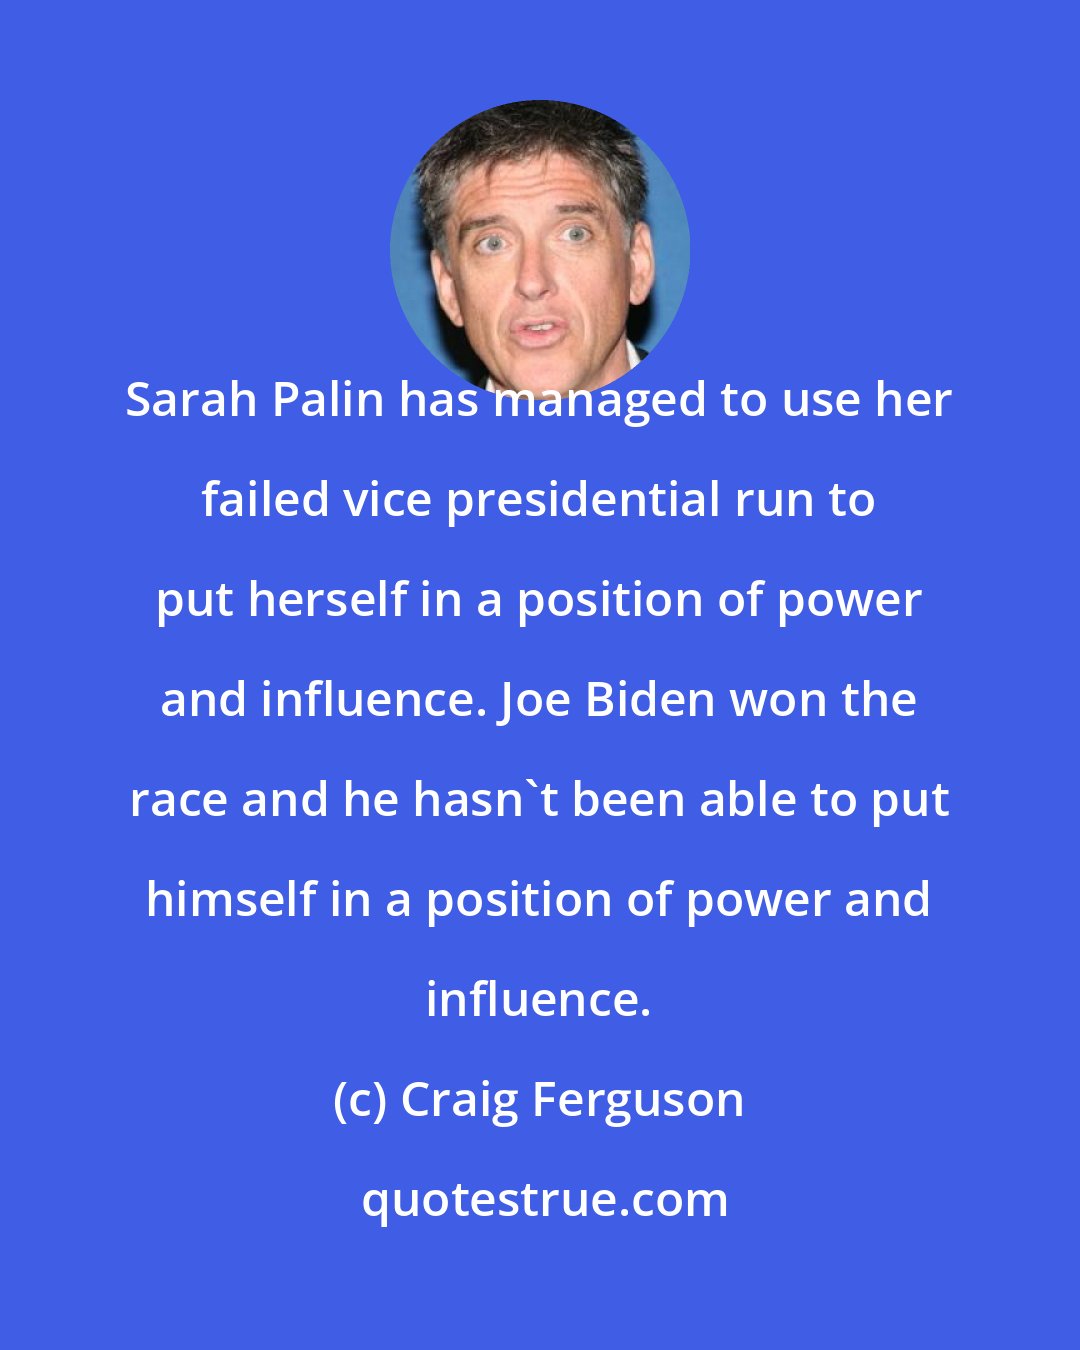 Craig Ferguson: Sarah Palin has managed to use her failed vice presidential run to put herself in a position of power and influence. Joe Biden won the race and he hasn't been able to put himself in a position of power and influence.